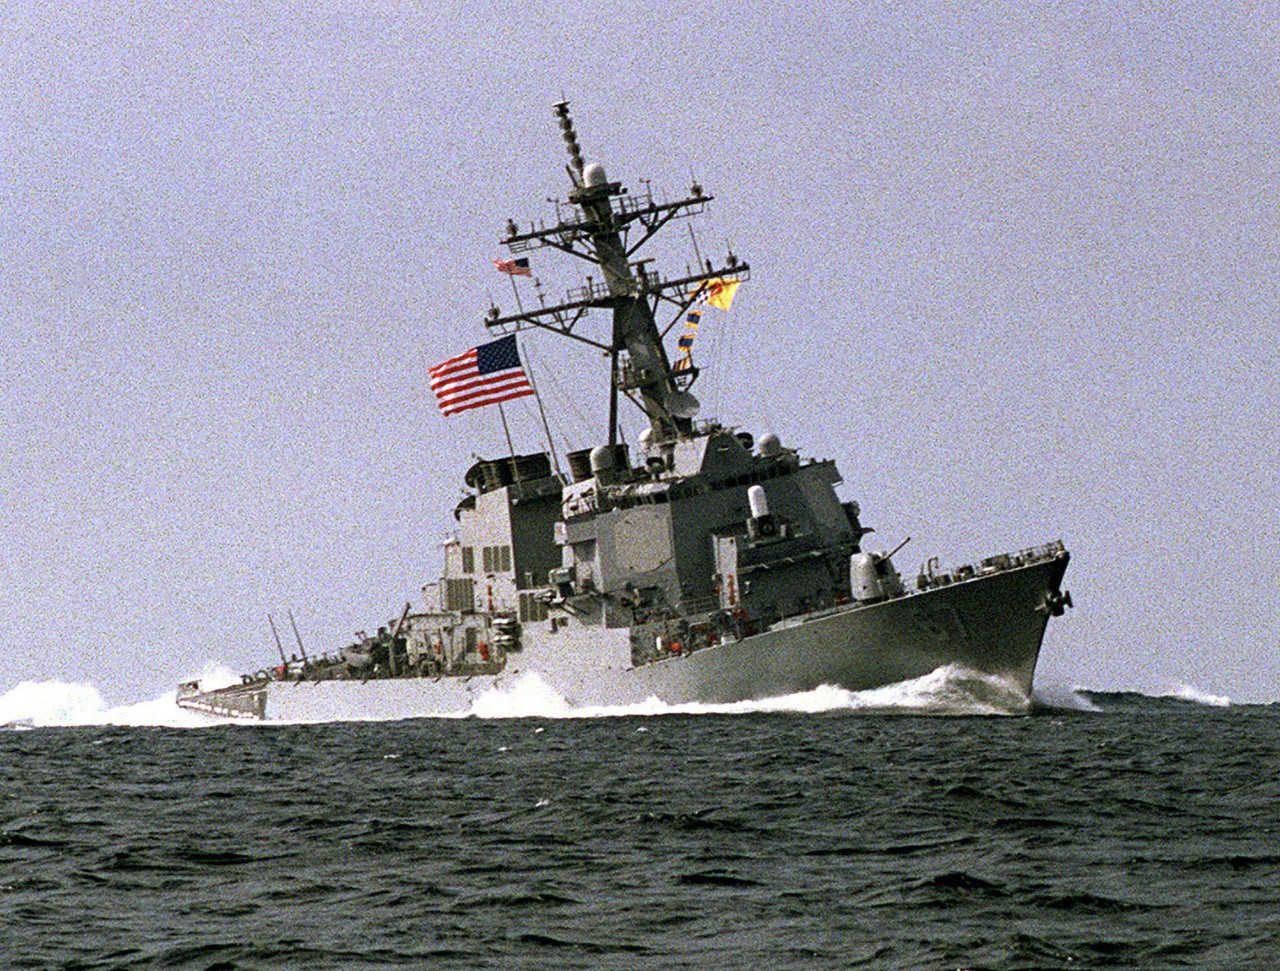 330-CFD-DN-SD-03-1115:  USS Cole (DDG-67), 1998.  A starboard bow view of the Cole underway in the Persian Gulf, in support of the Southwest Asia operations, April 22, 1998.  Official U.S. Navy photograph, now in the collections of the U.S. National Archives.